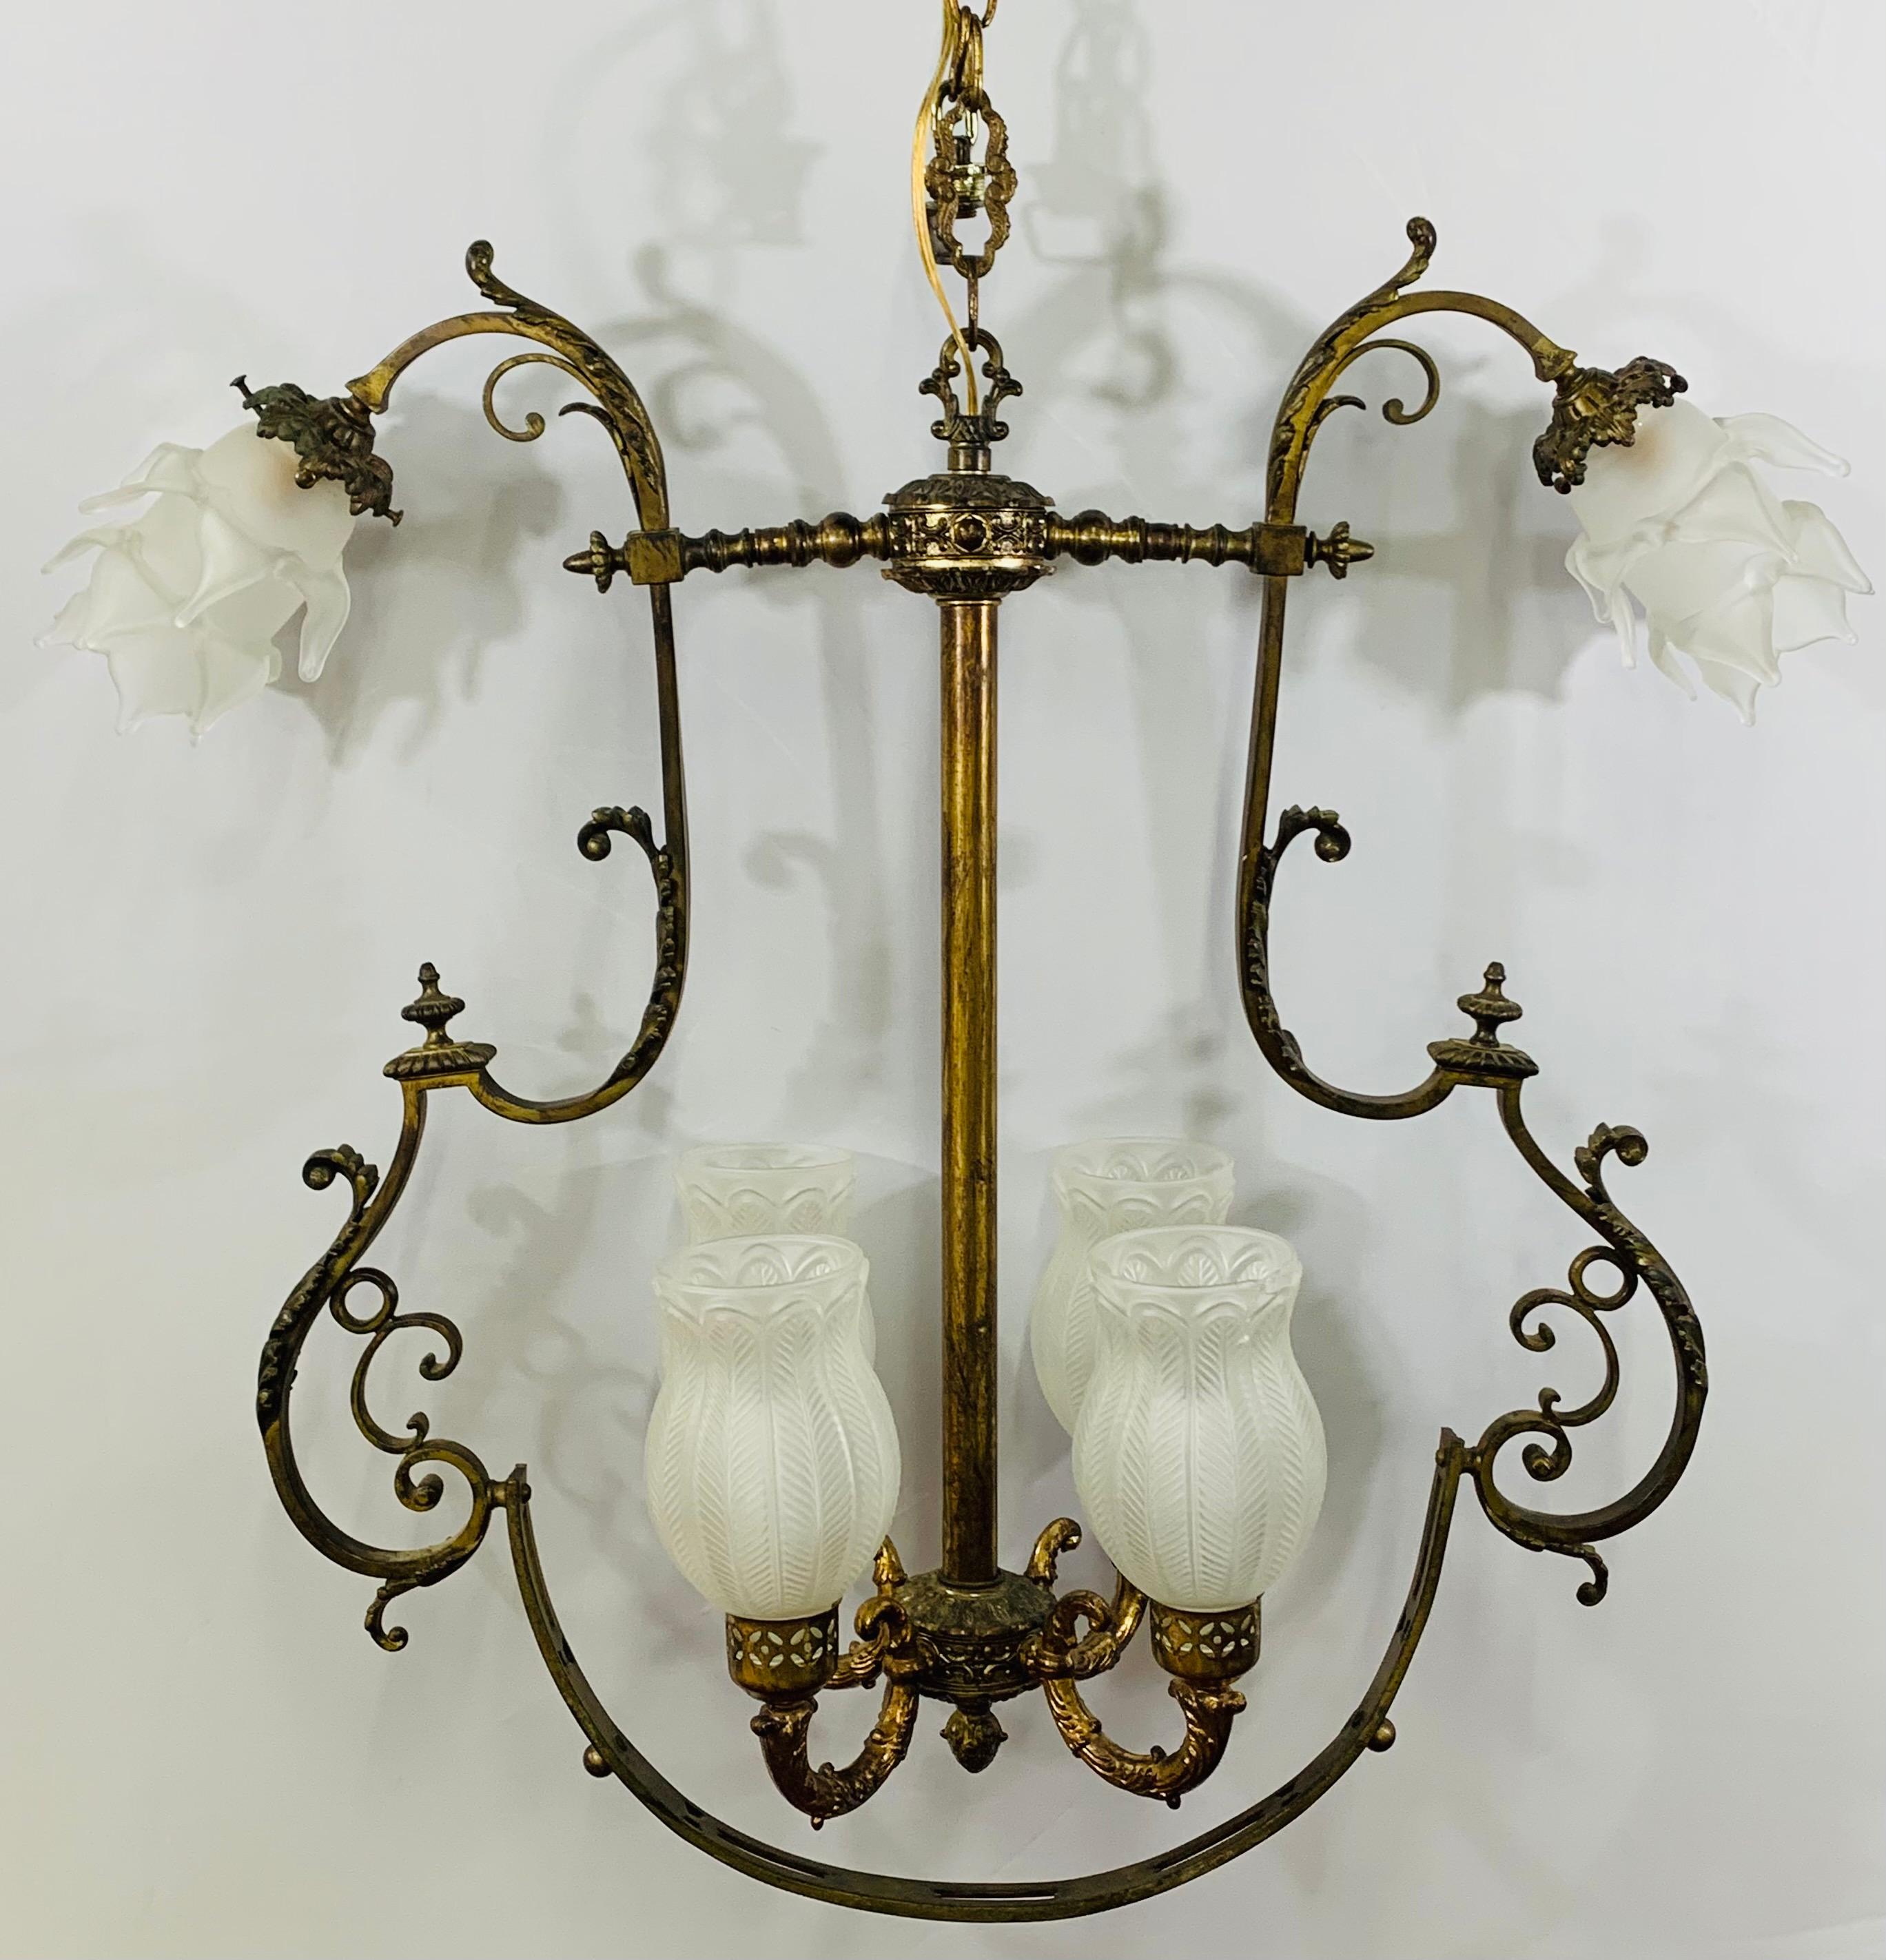 An exquisite early 20th century French Victorian Gasolier converted 6-light chandelier. The elegant brass chandelier features 4 candelabra lights with original etched globe shades in the center and two arms ending with one candelabra light on each